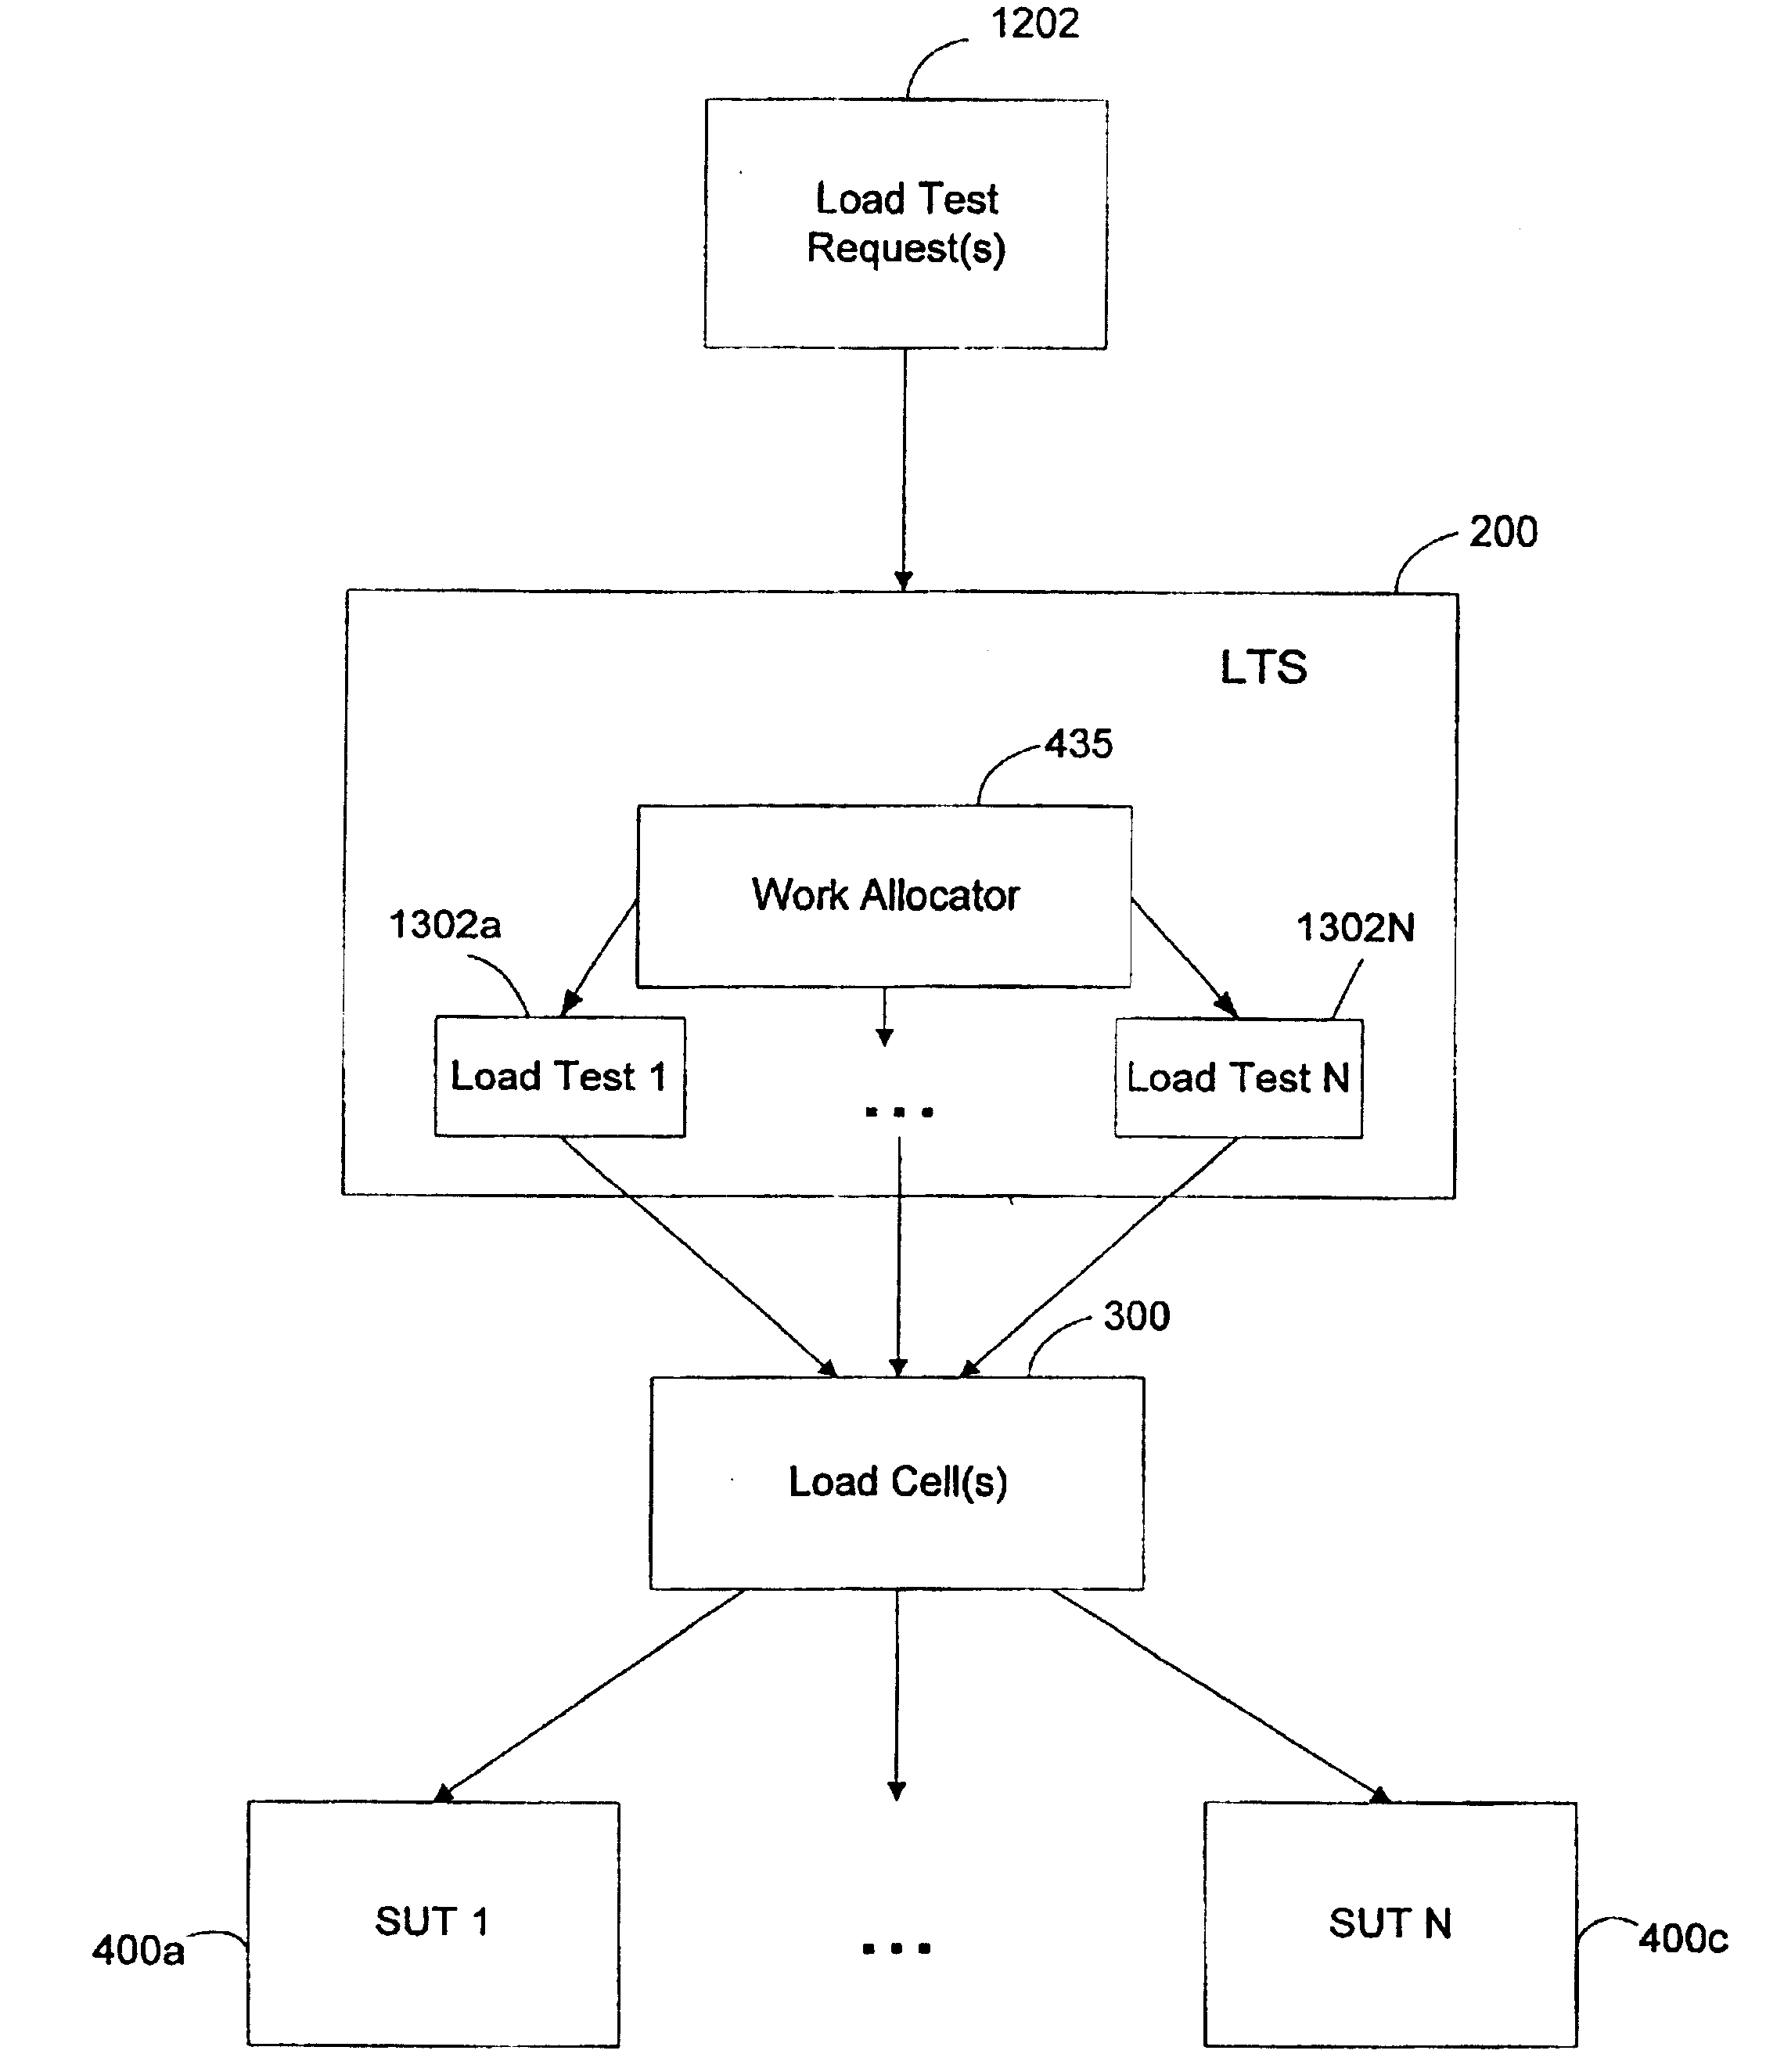 System load testing coordination over a network